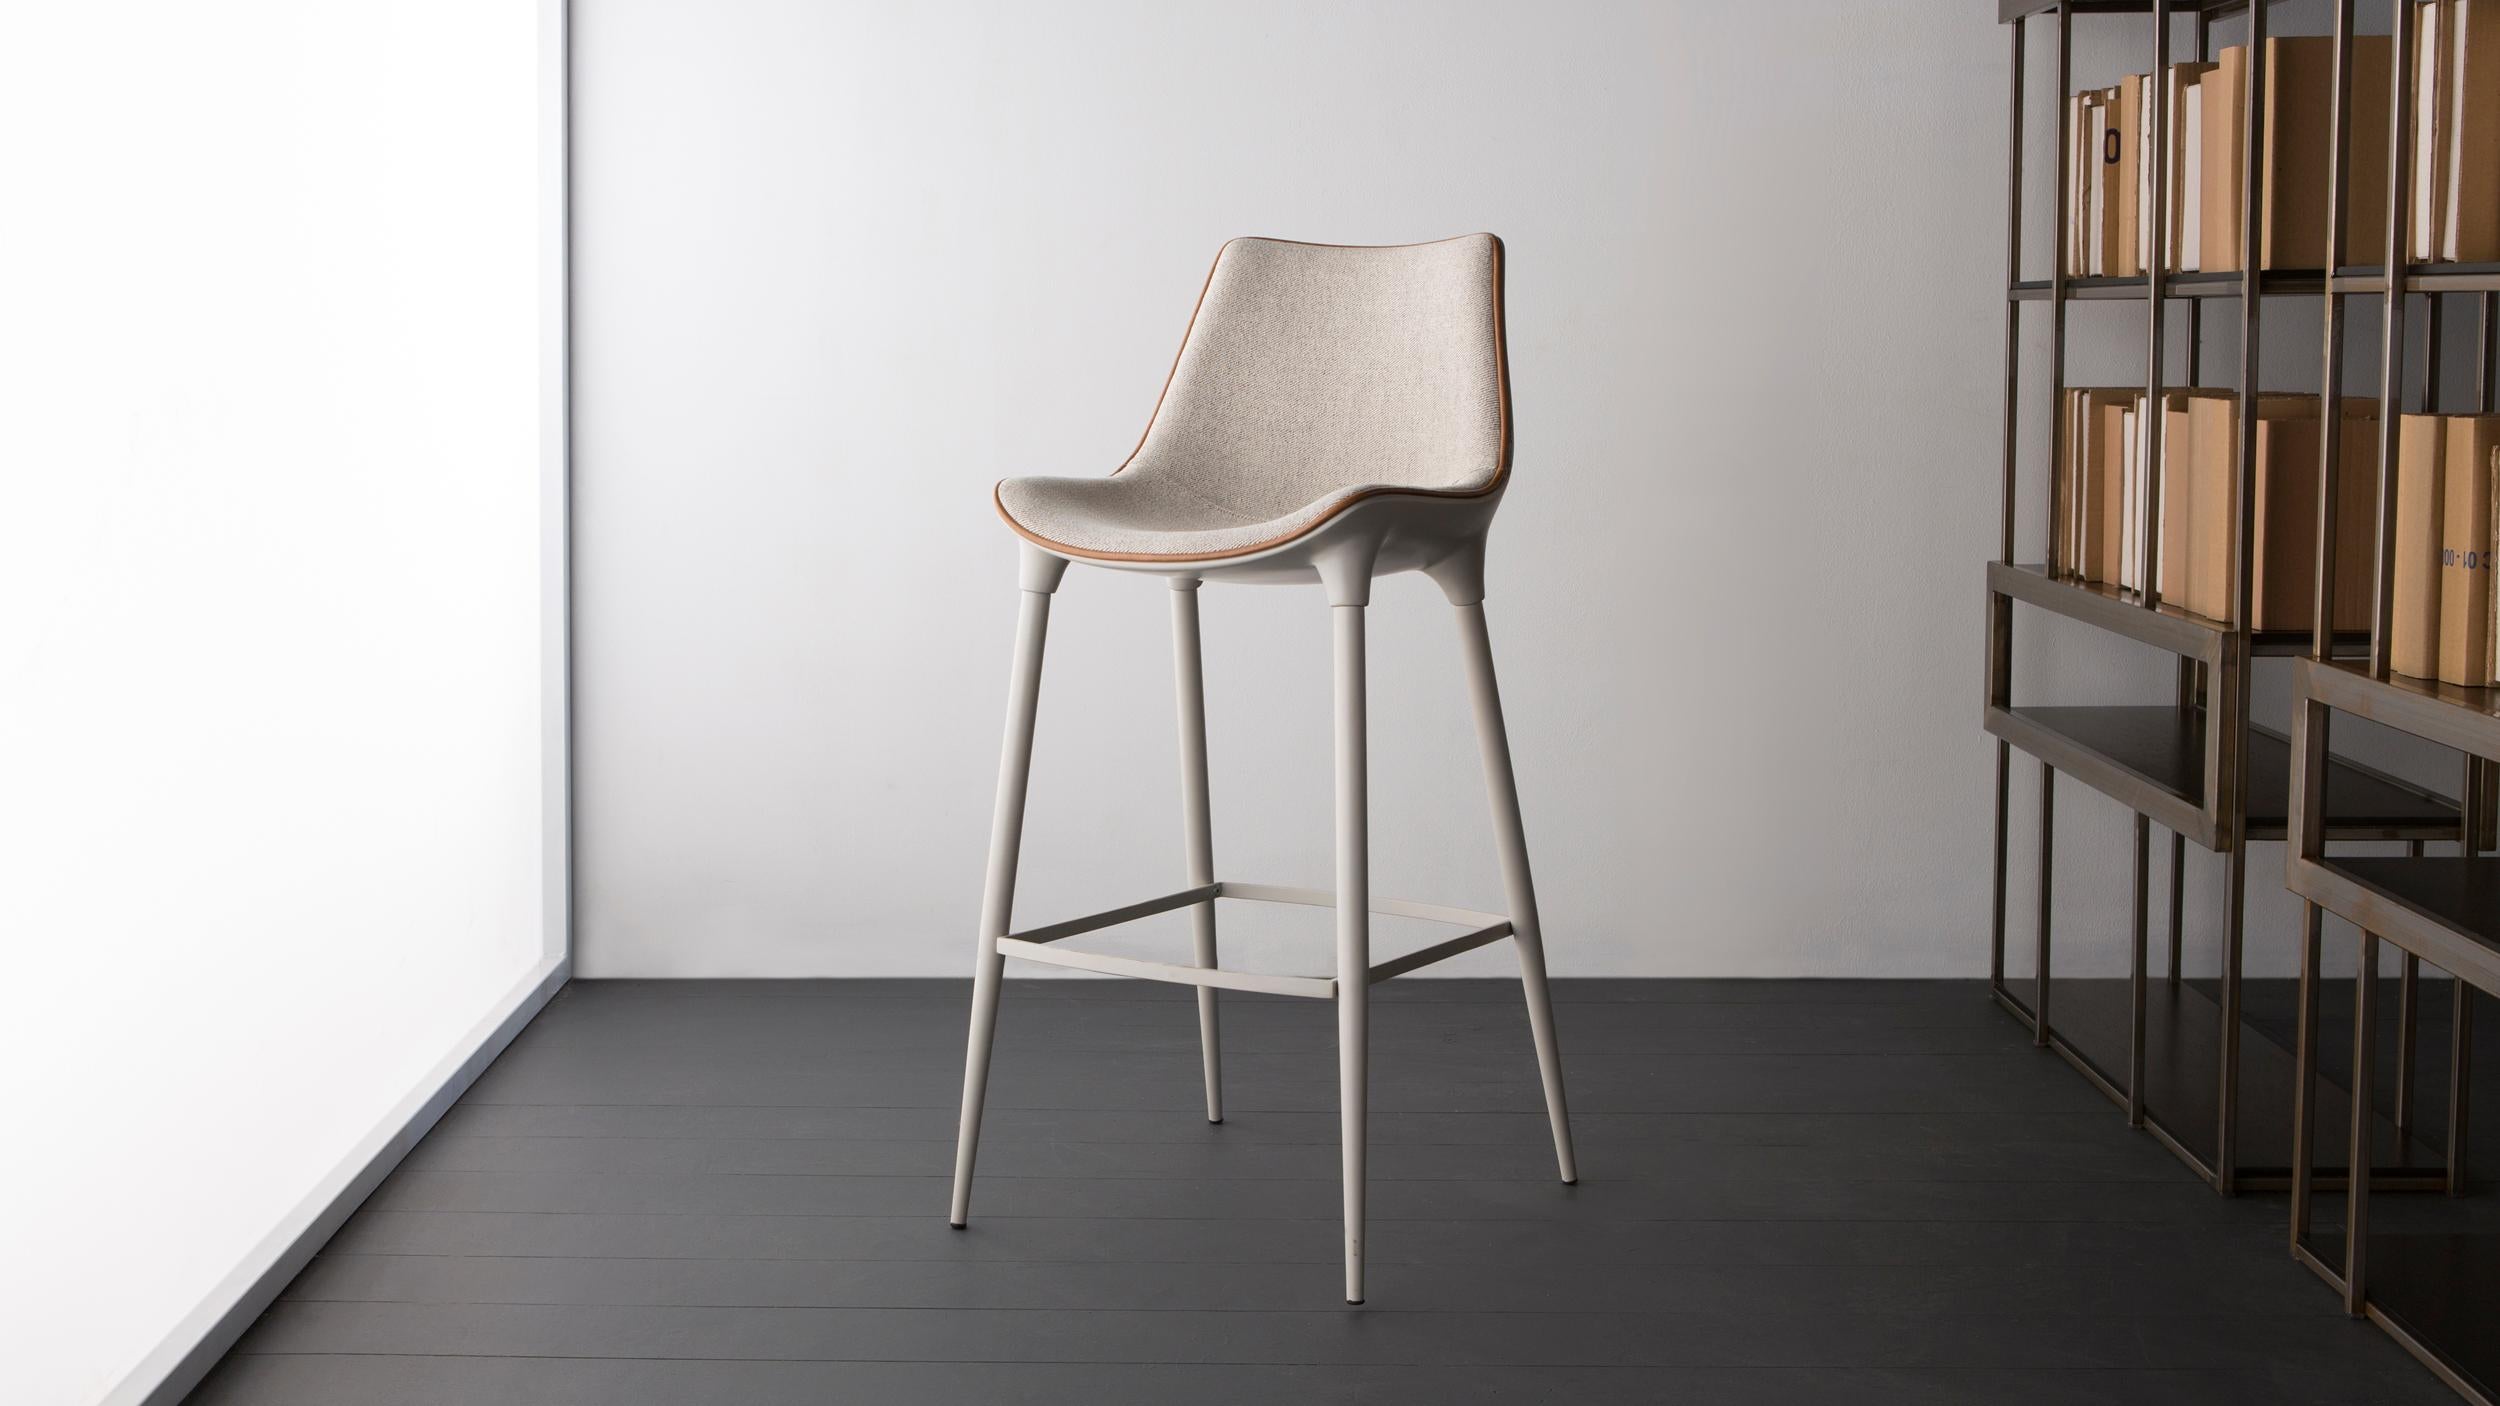 High Luna Bar Stool by Doimo Brasil
Dimensions: W 51 x D 53 x H 106 cm 
Materials: Paint, Fabric.

Also available in W 51 x D 53 x H 90 cm, Seat Height: 60 cm. 

With the intention of providing good taste and personality, Doimo deciphers trends and